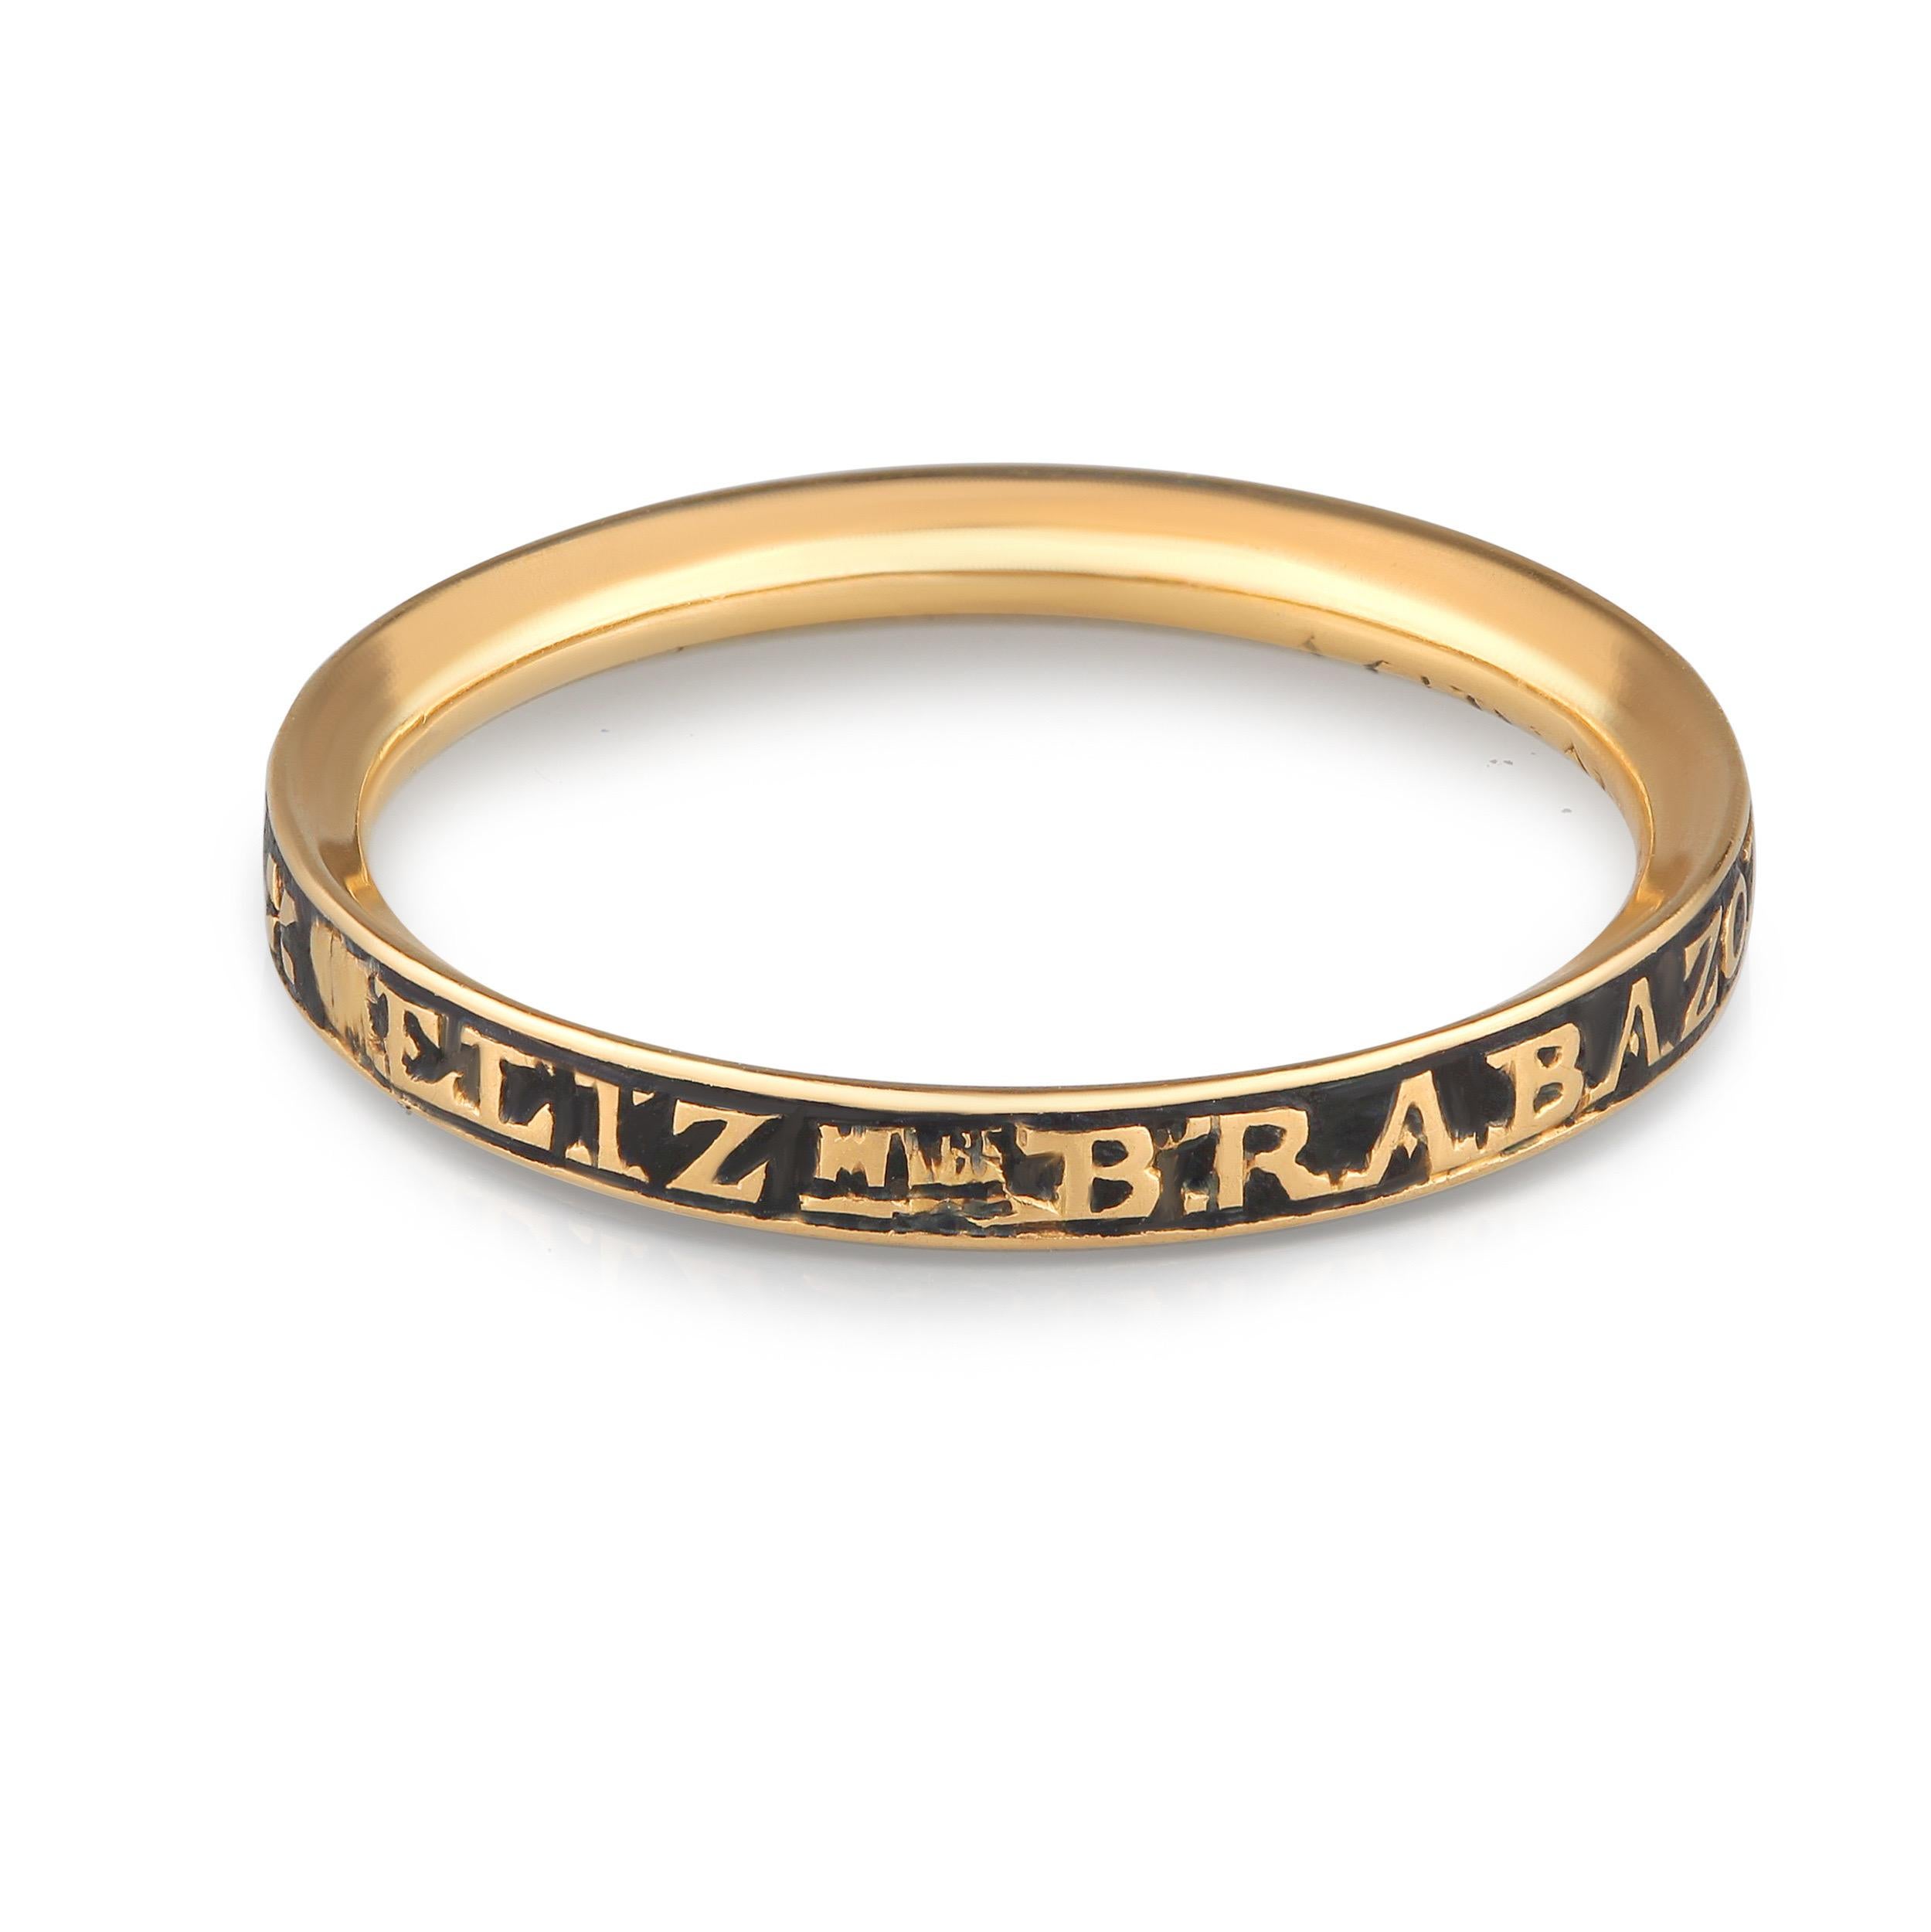 An English or Irish mourning ring made for the family of Elizabeth Brabazon. During her life, there was a prominent Brabazon family that carried the title of Earl of Meath in Ireland. Unfortunately, we couldn't find any death records for Elizabeth